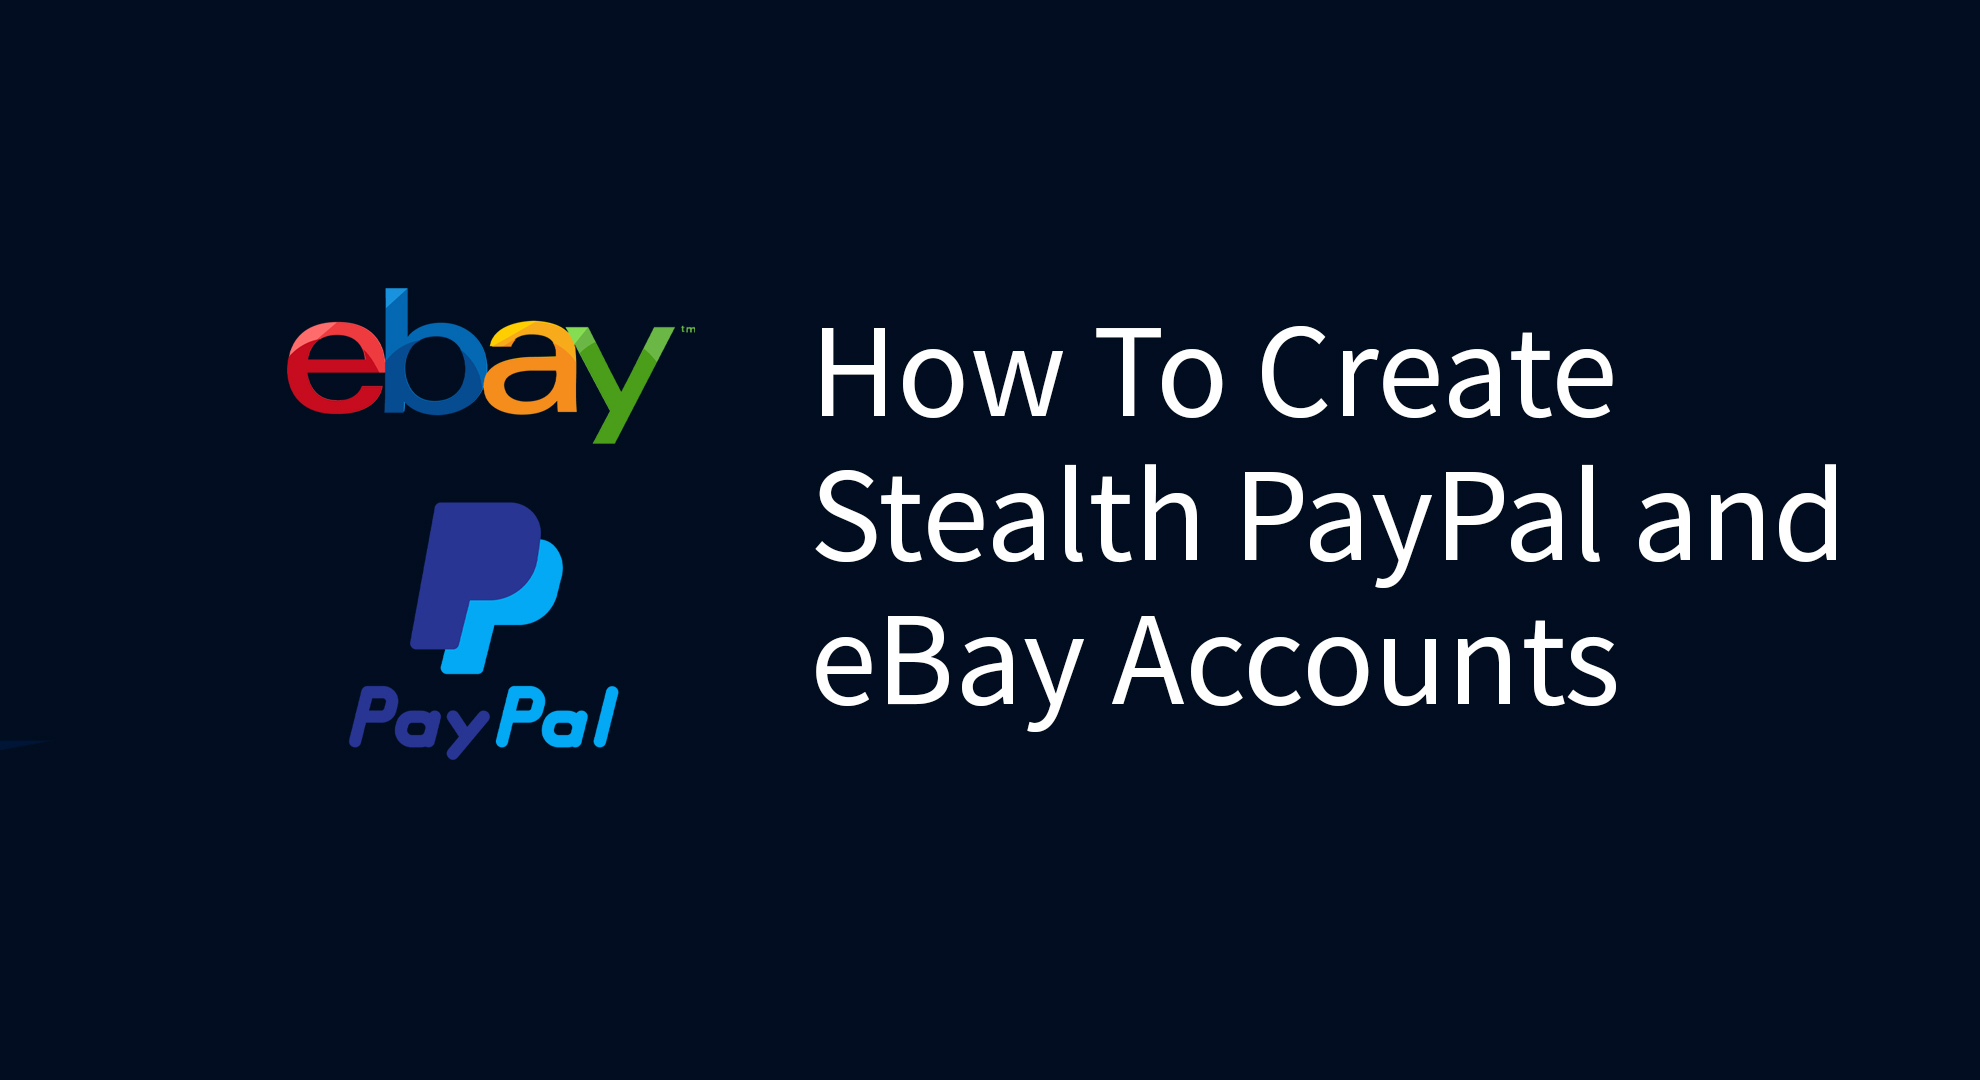 ebay stealth guide leaked.to